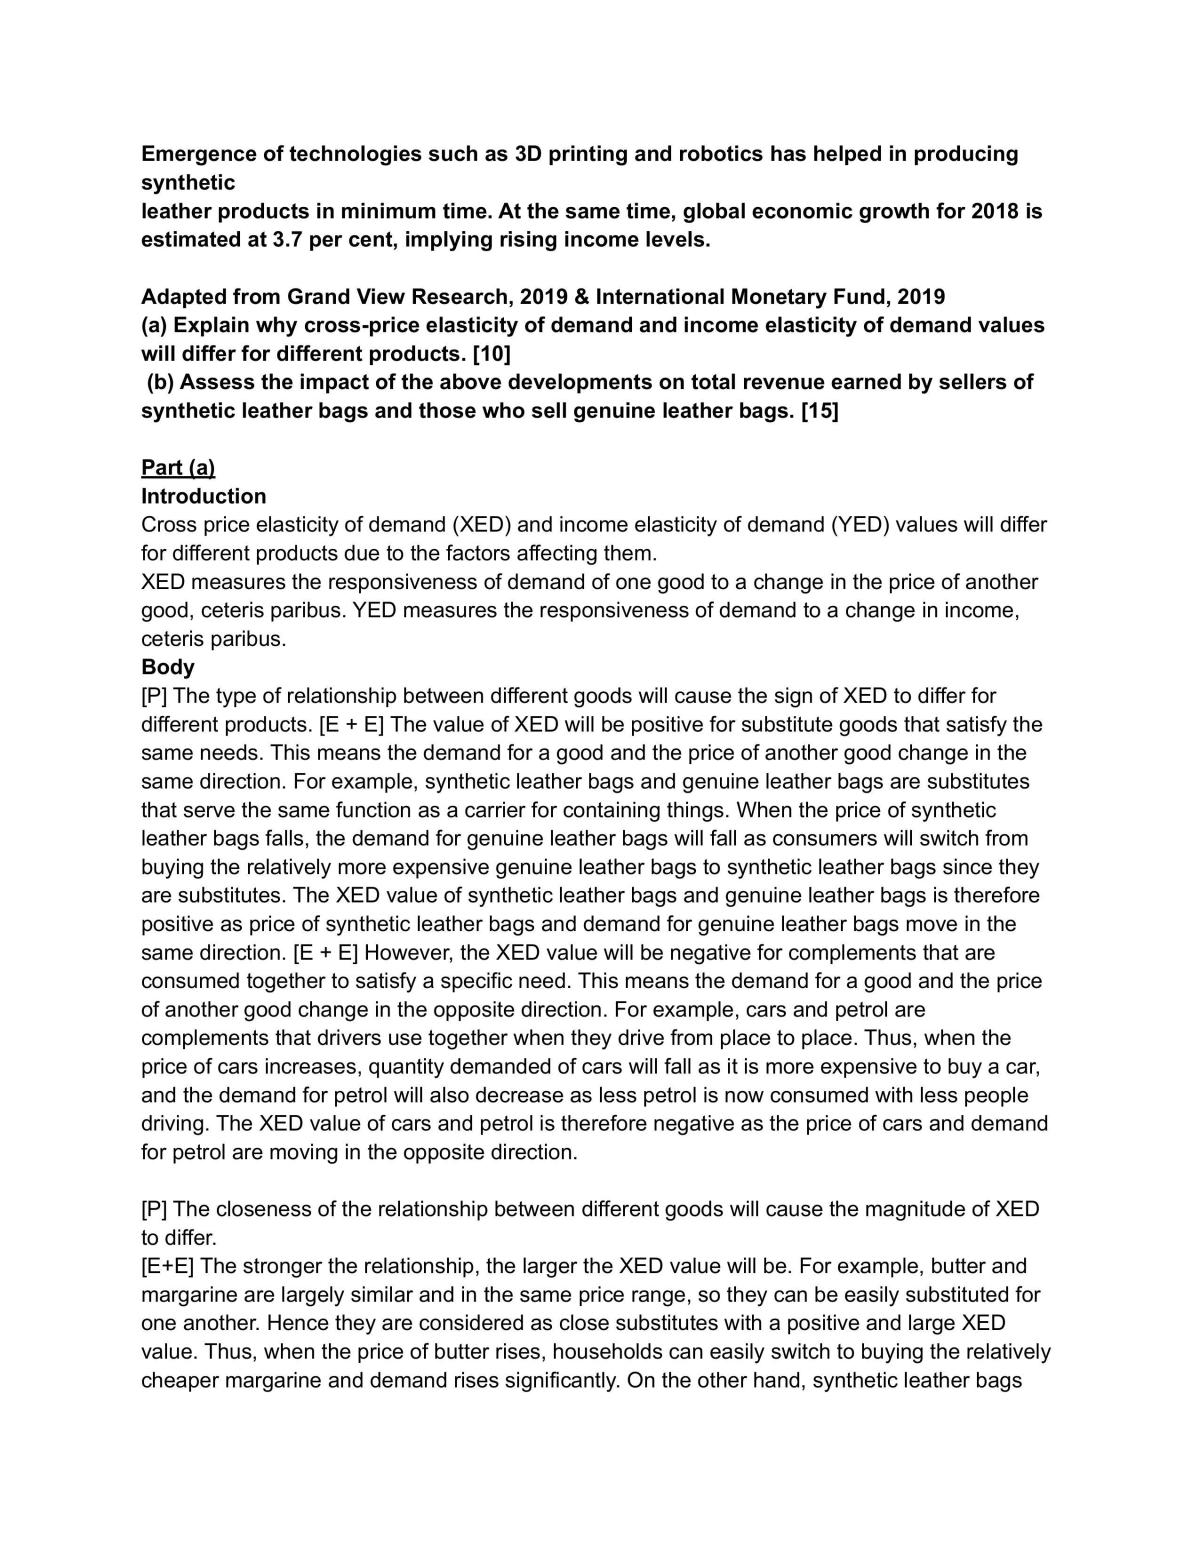 Demand and supply essay on 3D printing and robotics - Page 1